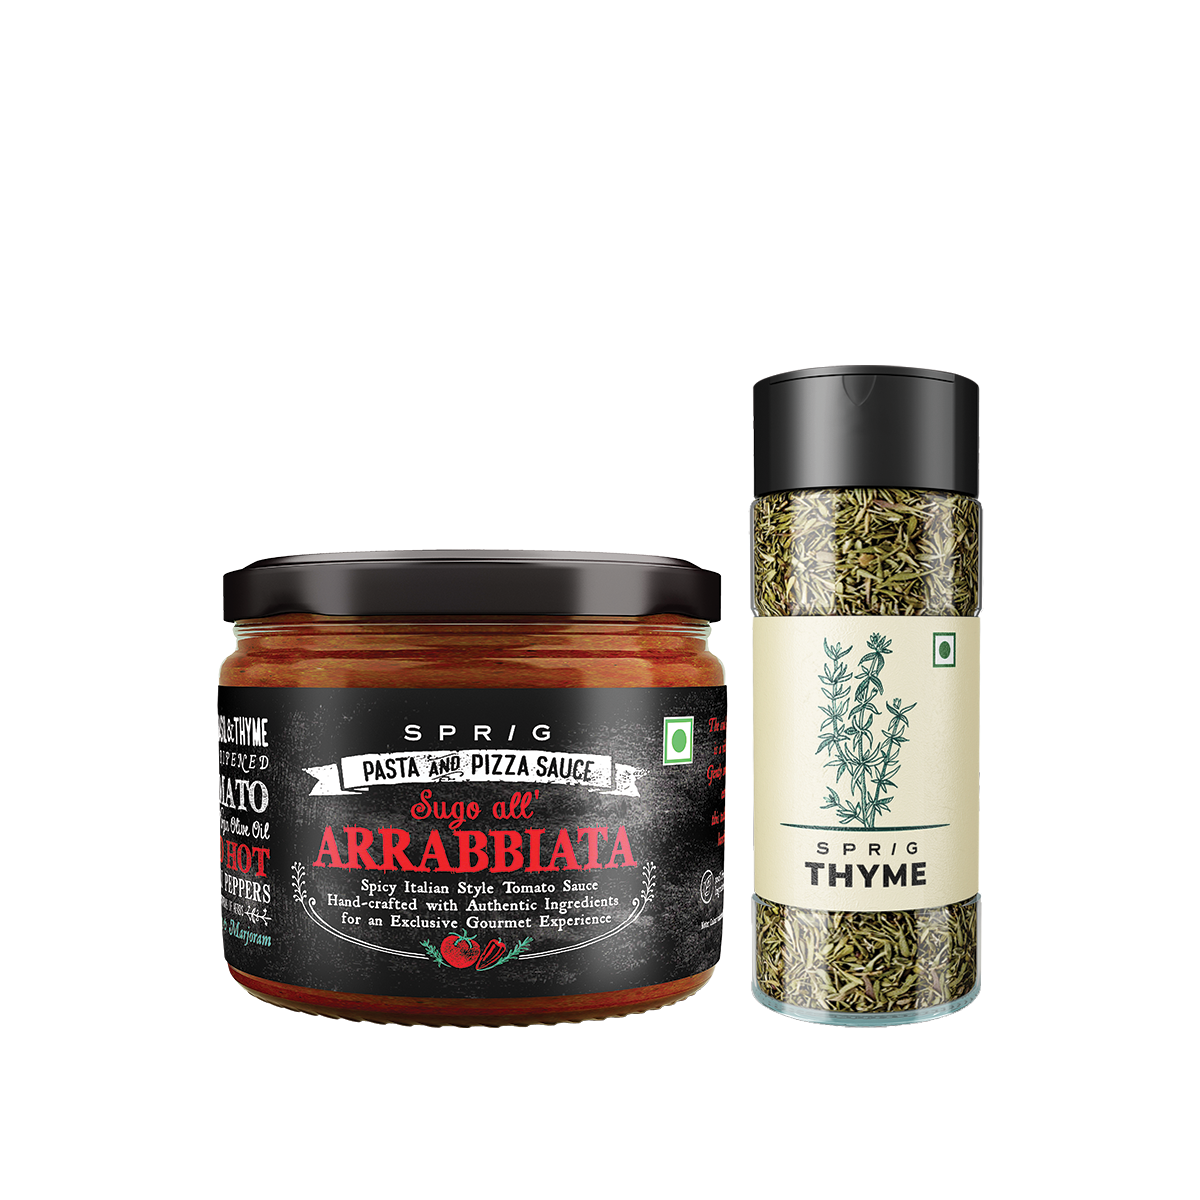 Pasta Flavouring Combo - Sprig Arrabbiata Pasta And Pizza Sauce, 325g, & Thyme Seasoning